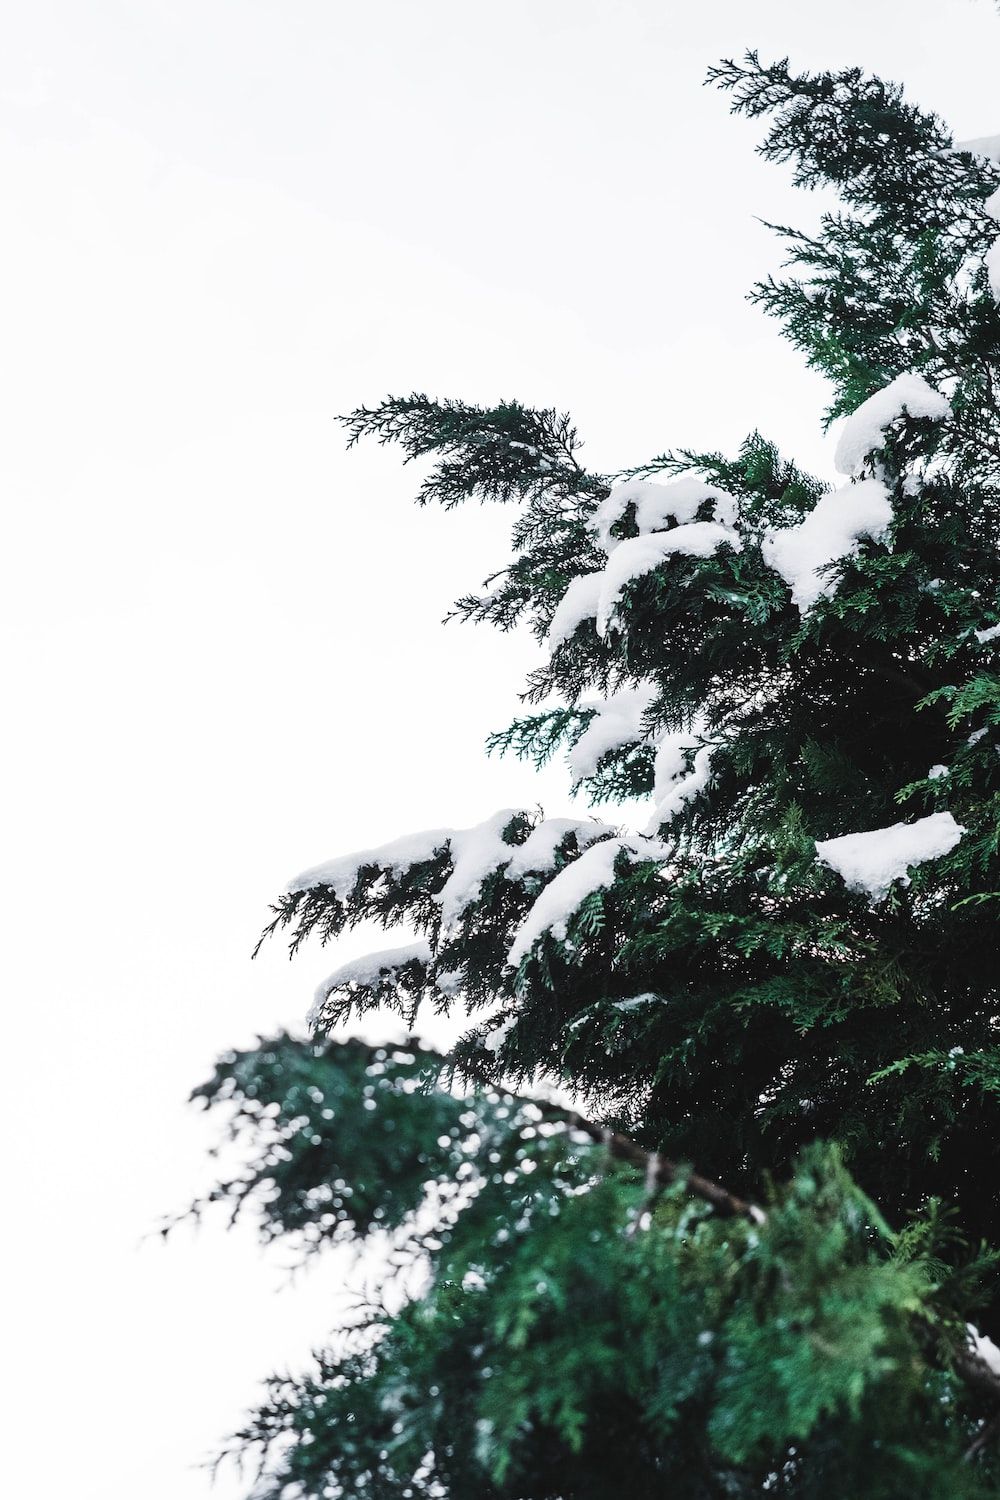 A snow-covered evergreen tree against a white sky - White Christmas